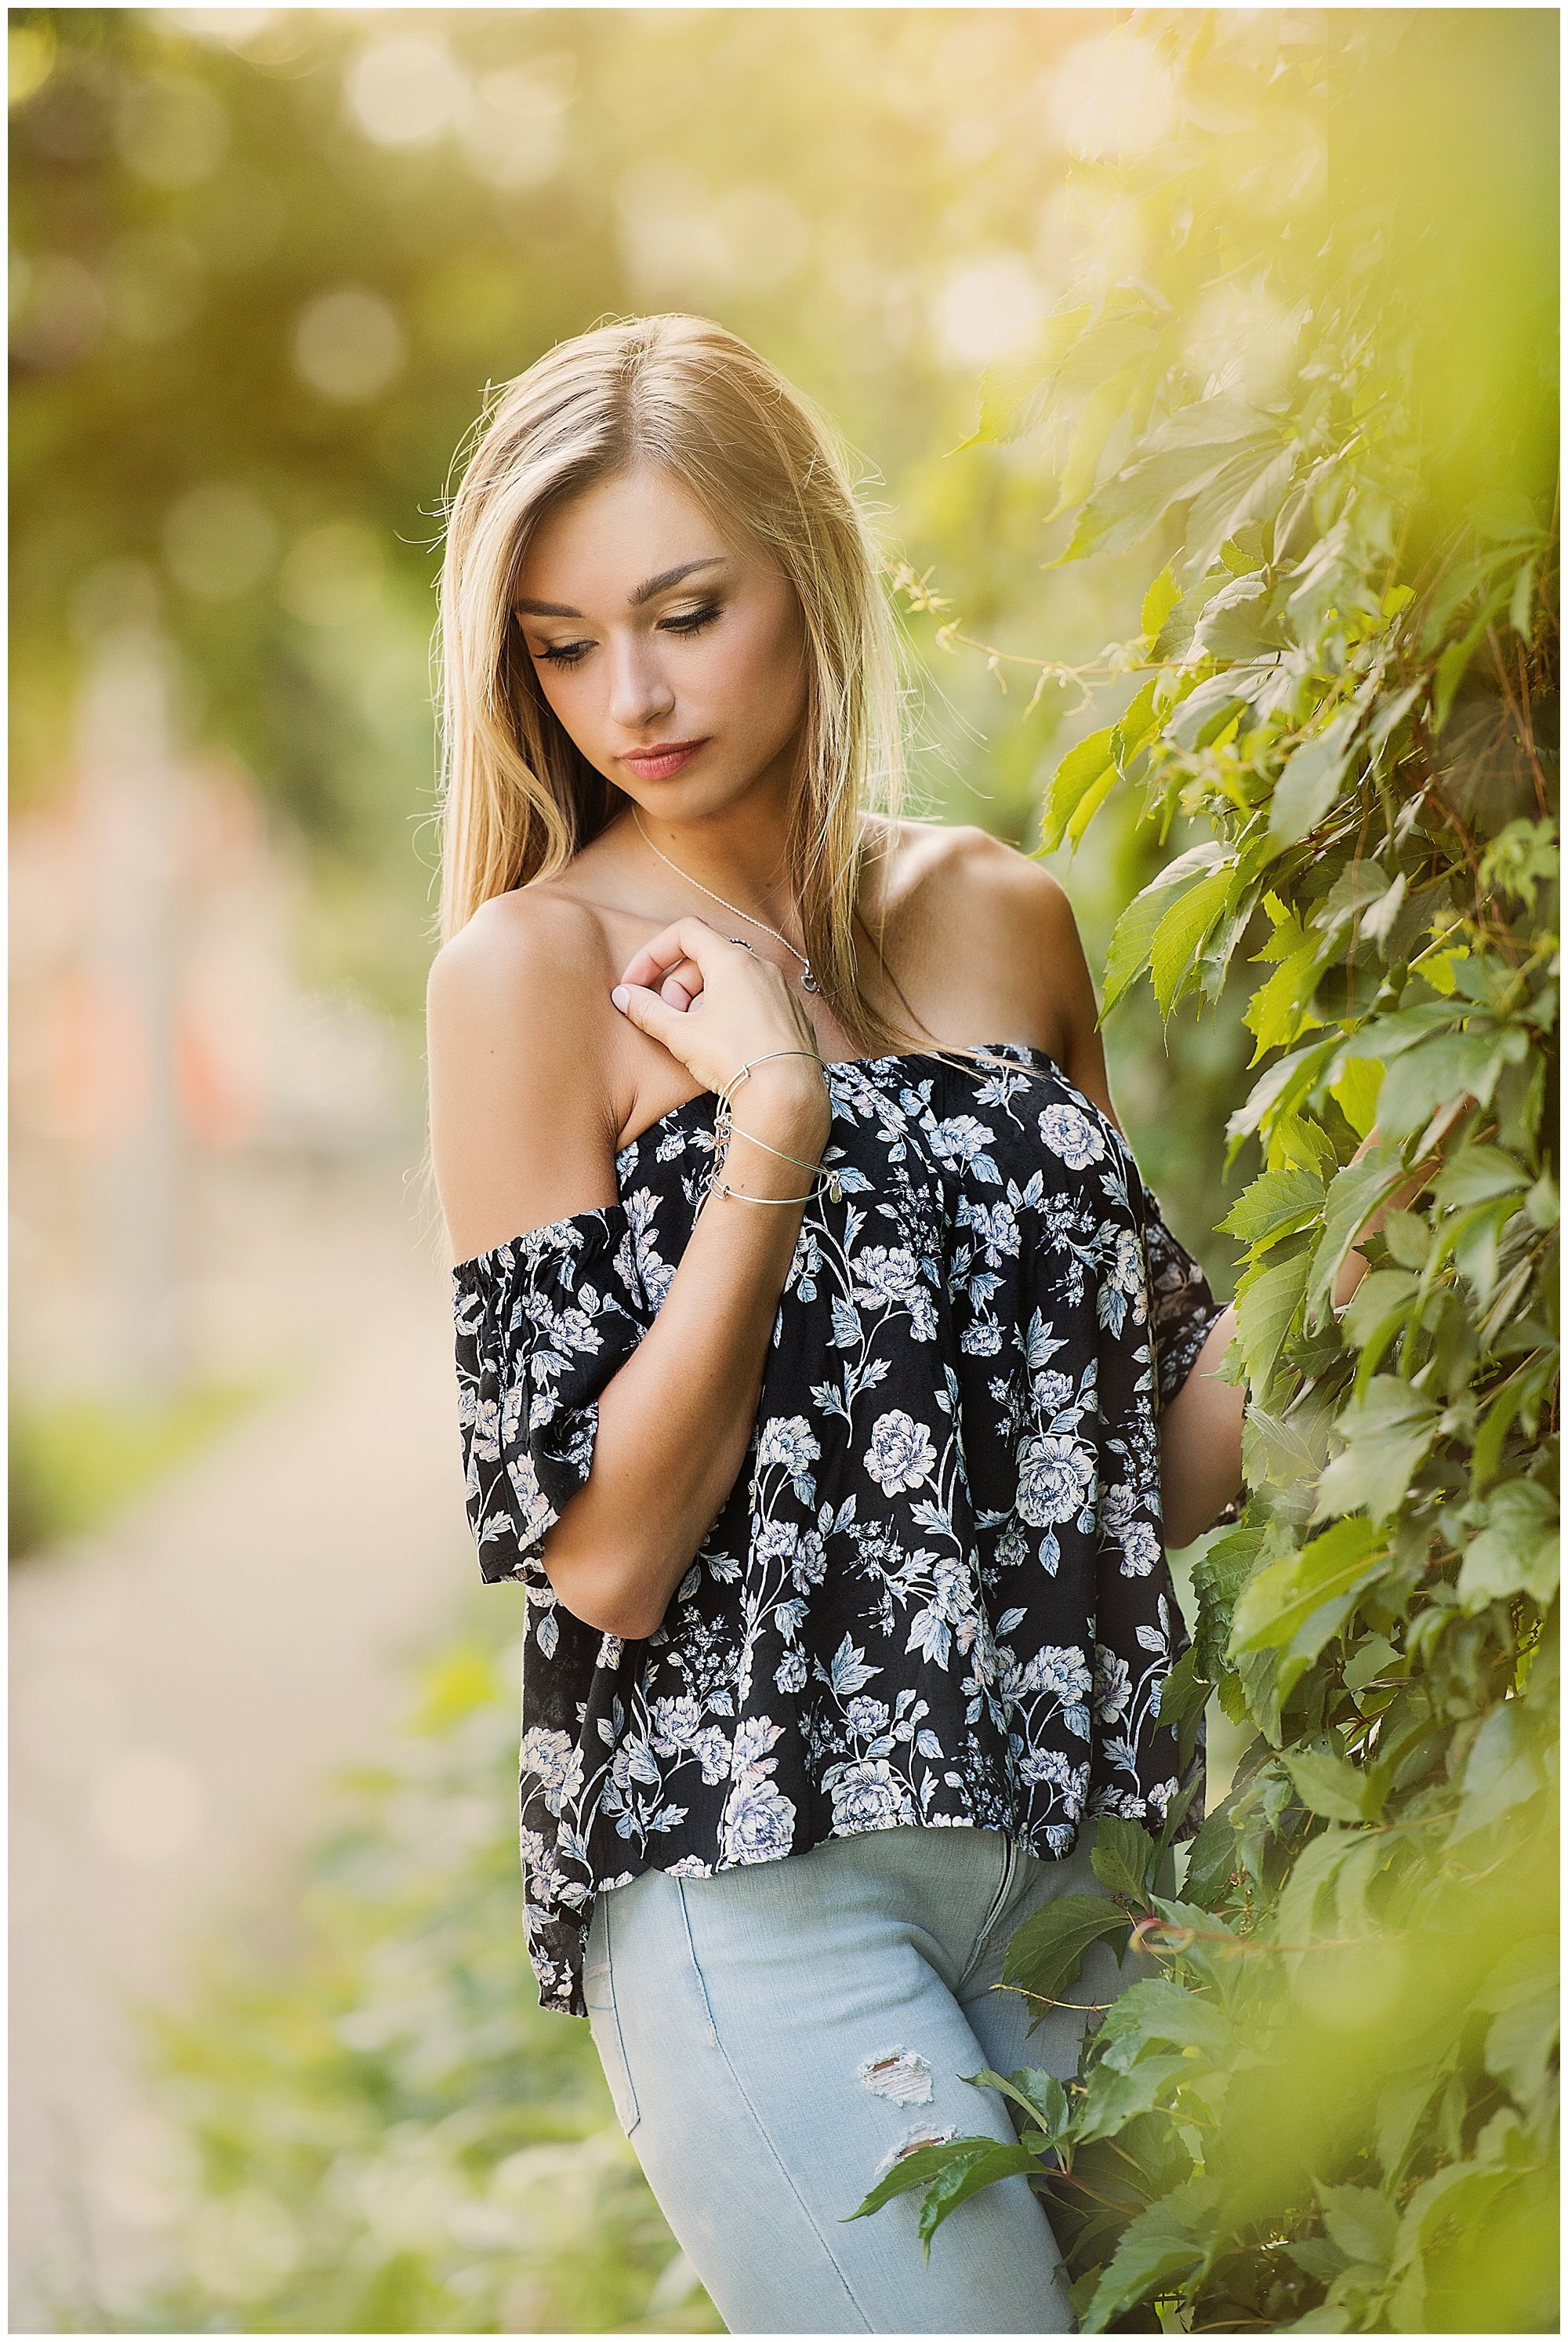 Andover Minnesota high school senior photo of girl with flower shirt and jeans against ivy wall with sun flare